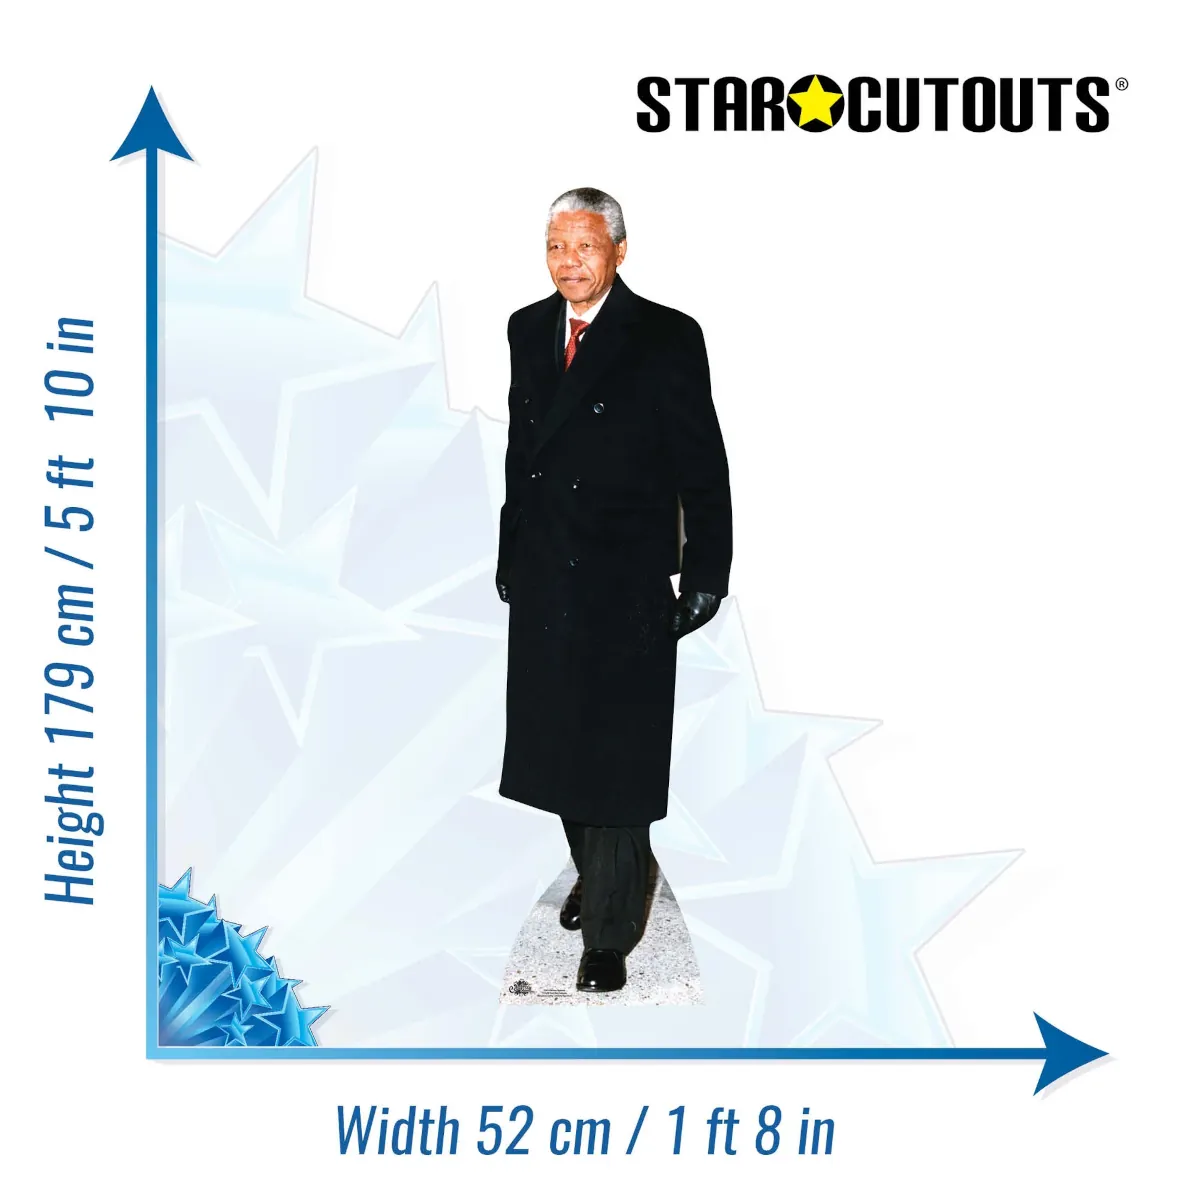 CS614 Nelson Mandela (Former President of South Africa) Lifesize Cardboard Cutout Standee Size